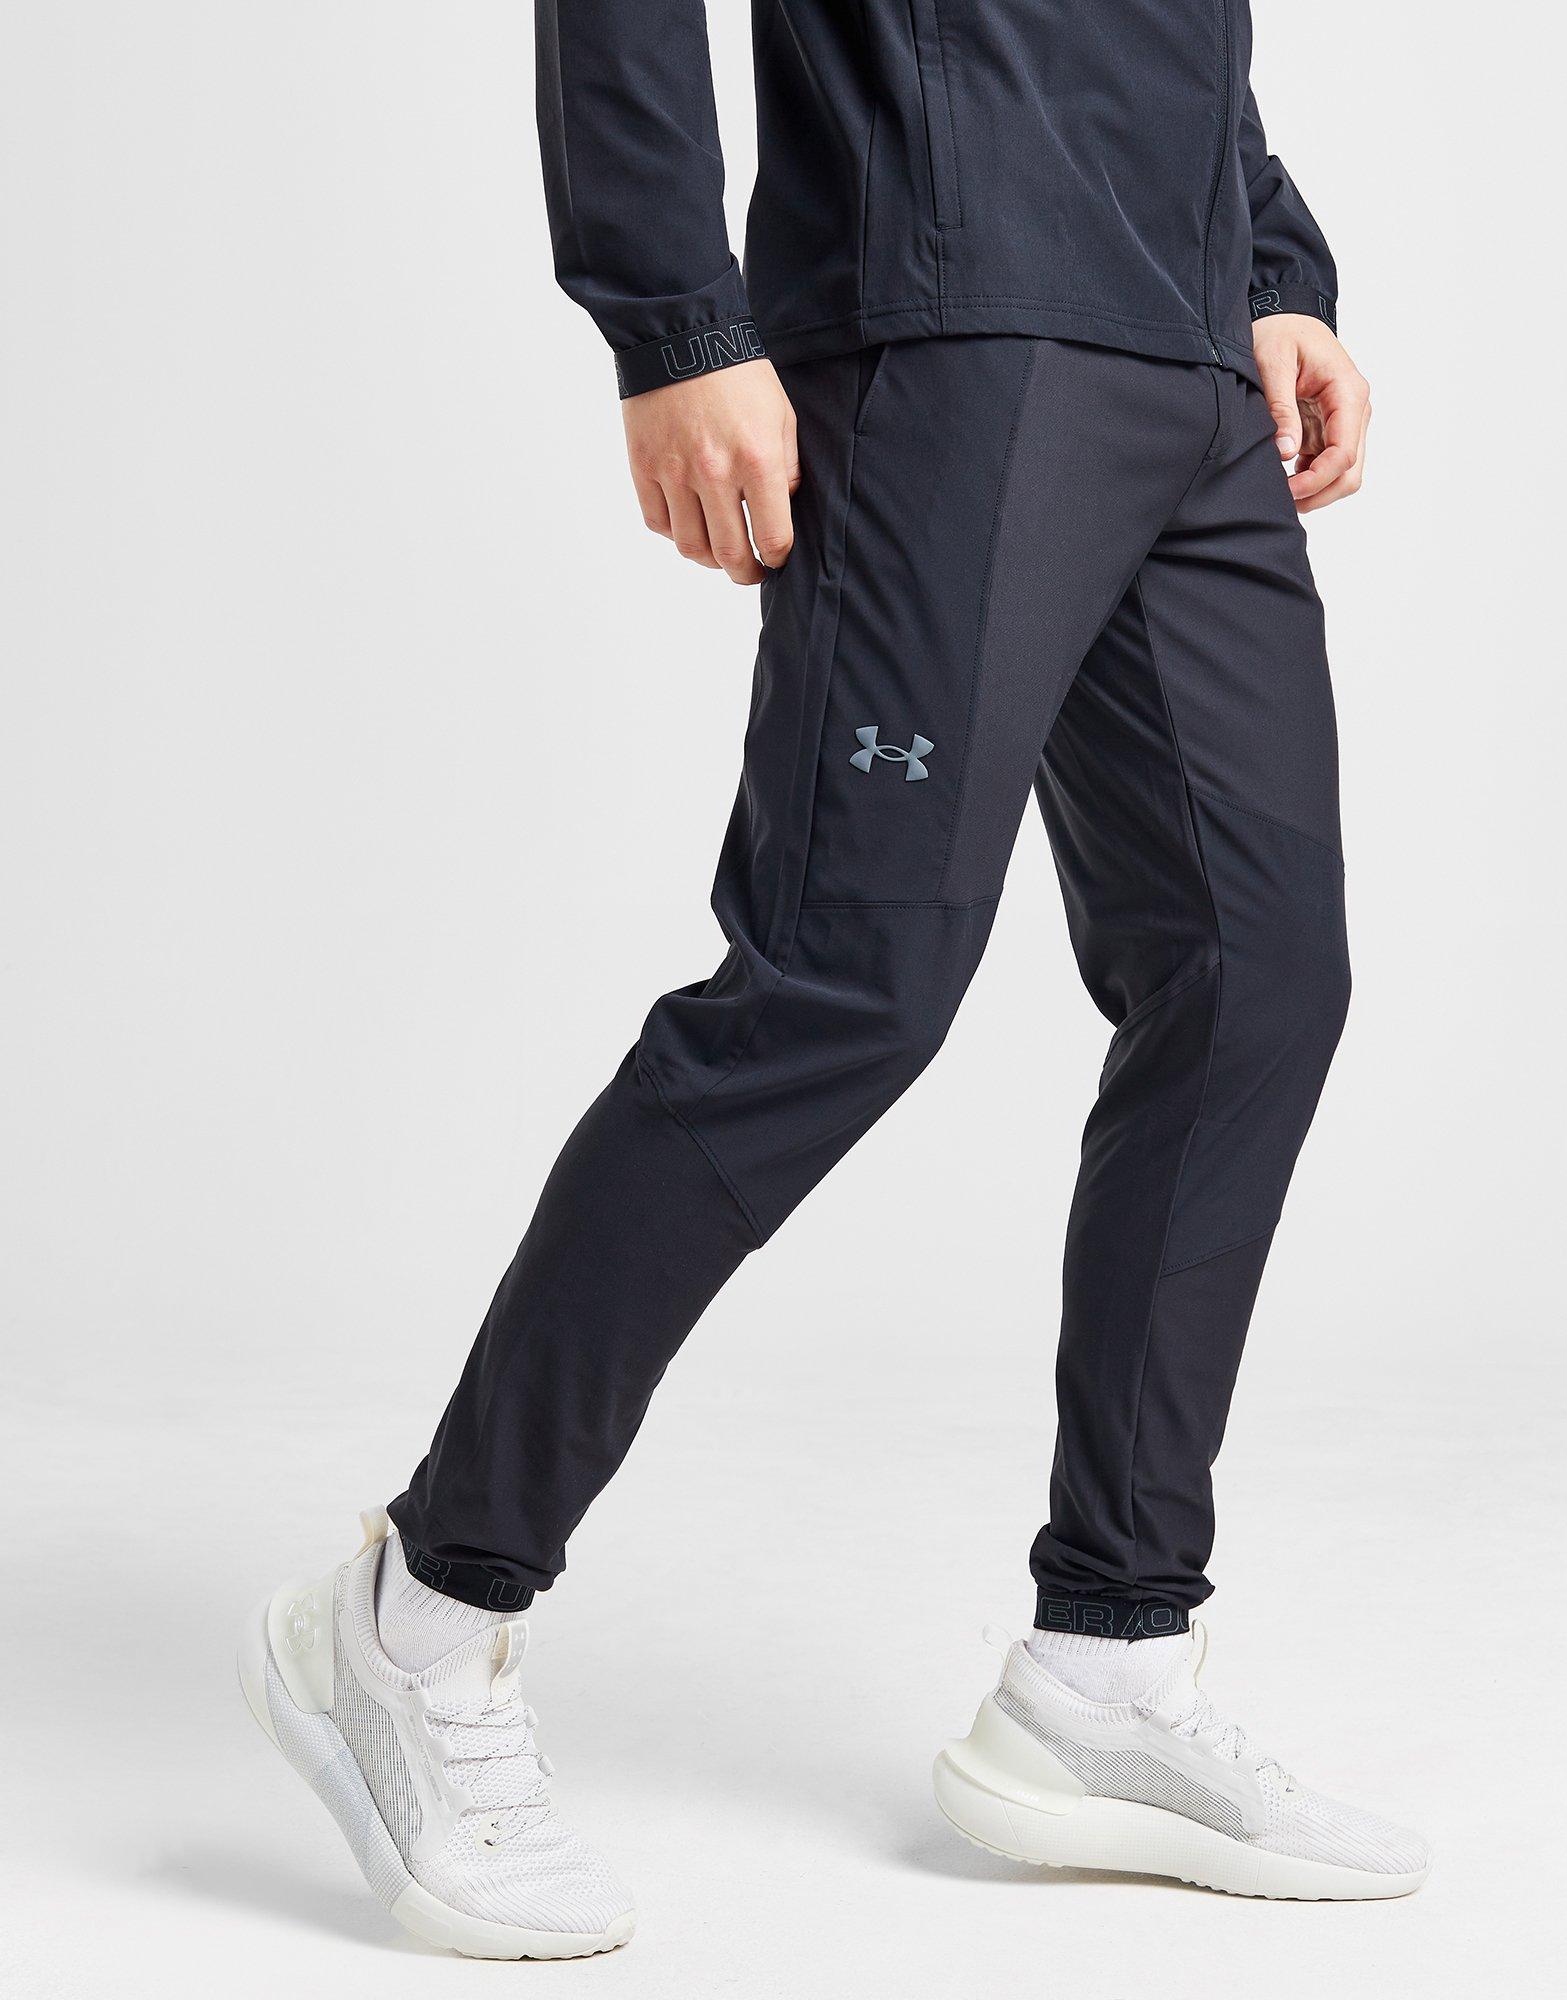 Under Armour Ua Storm Run Track Pants in Black for Men